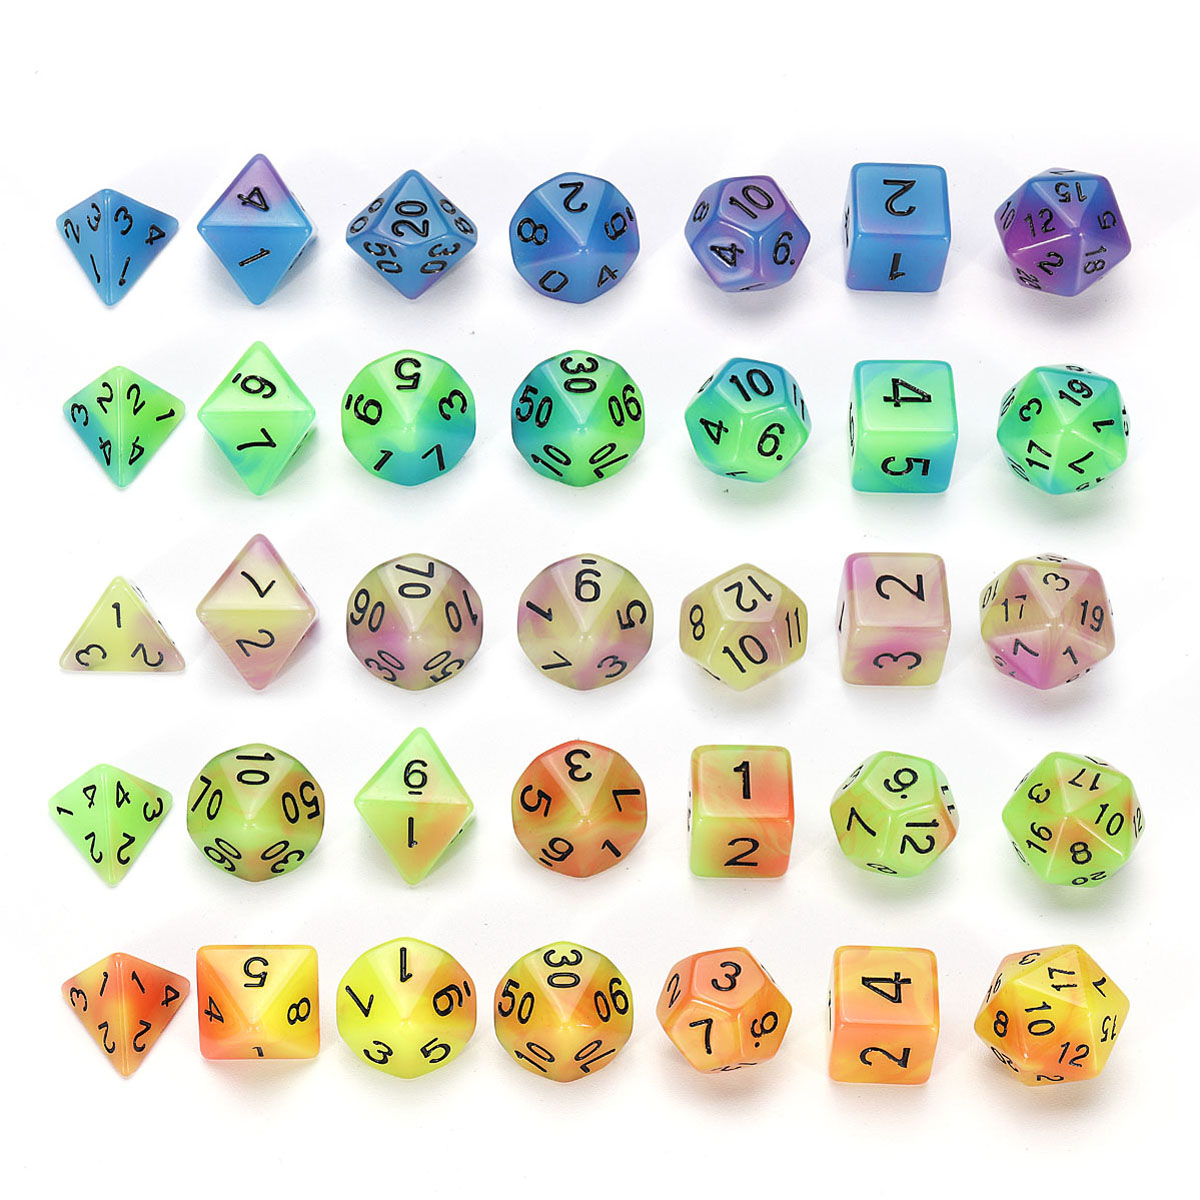 7-Pcs-Luminous-Polyhedral-Dices-Multisided-Dices-Dice-Set-With-Dice-Cup-For-RPG-1421428-3